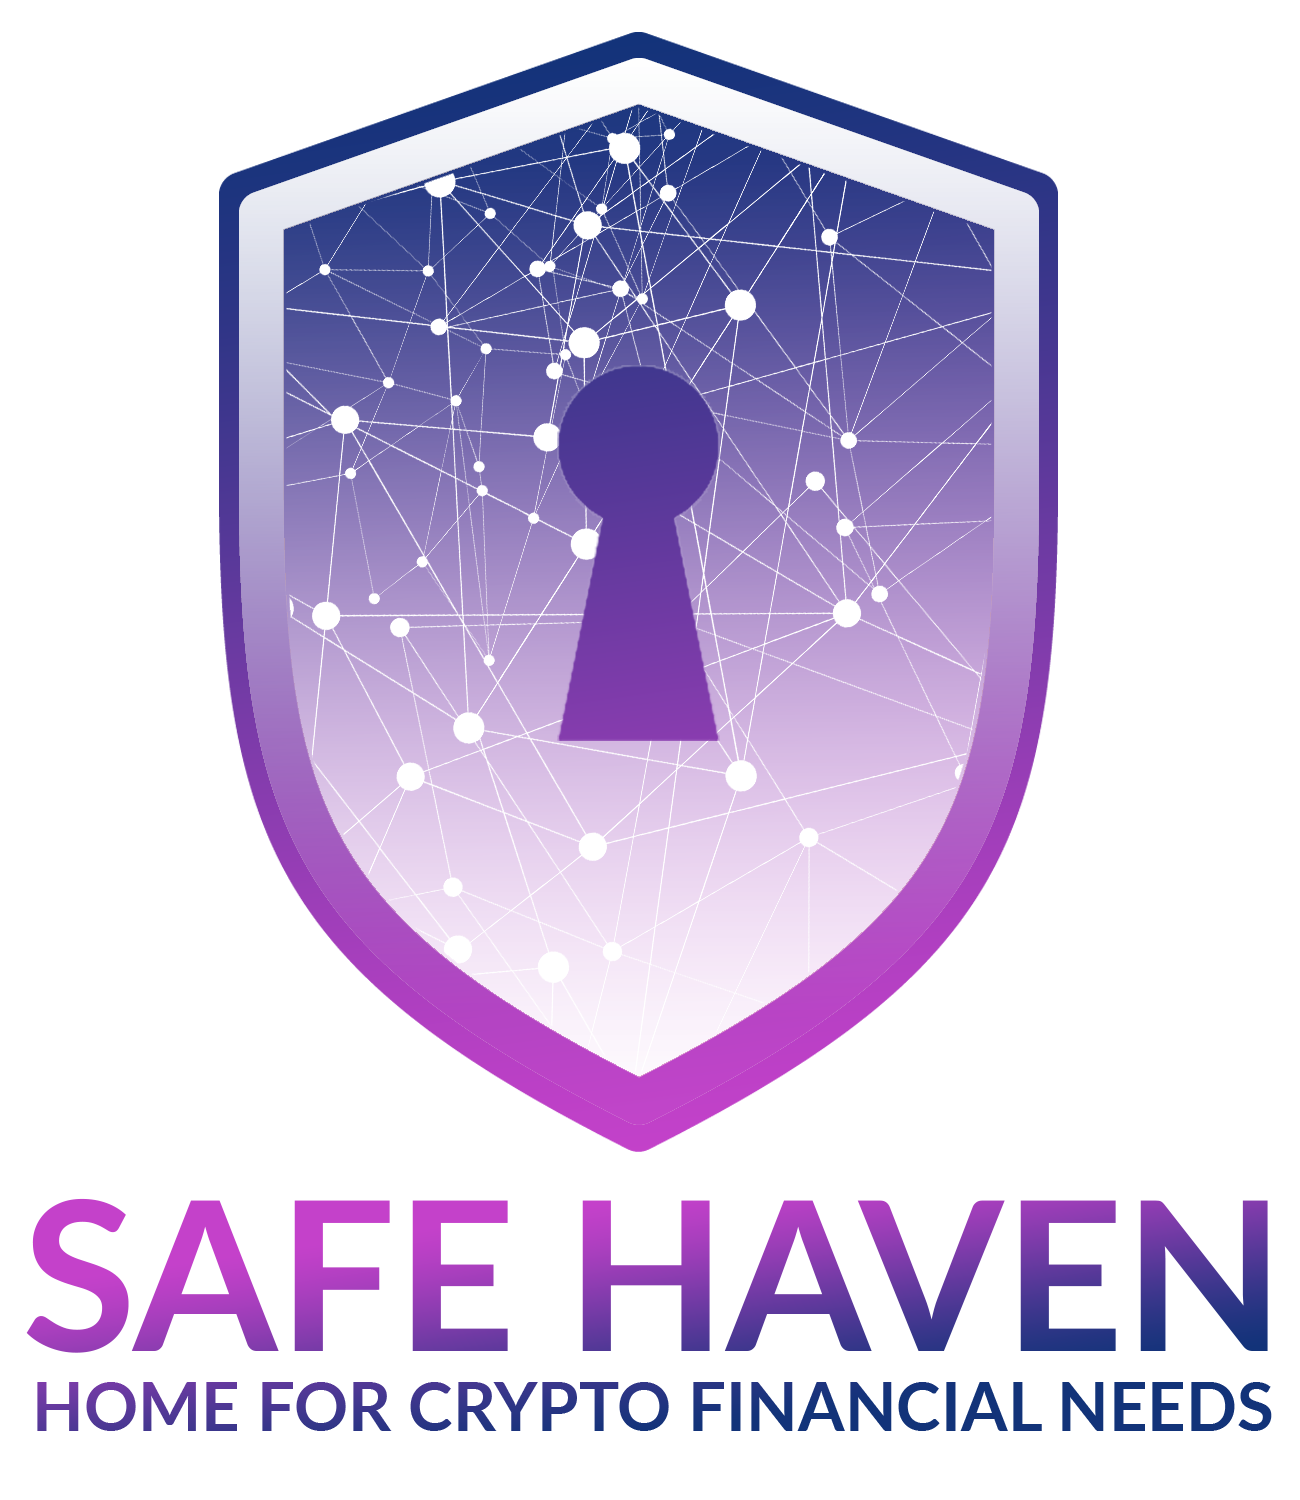 Safe Haven is a Decentralized platform which supports companies and blockchain projects. They open their platform and tech solutions to developers, entrepreneurs and trust professionals.